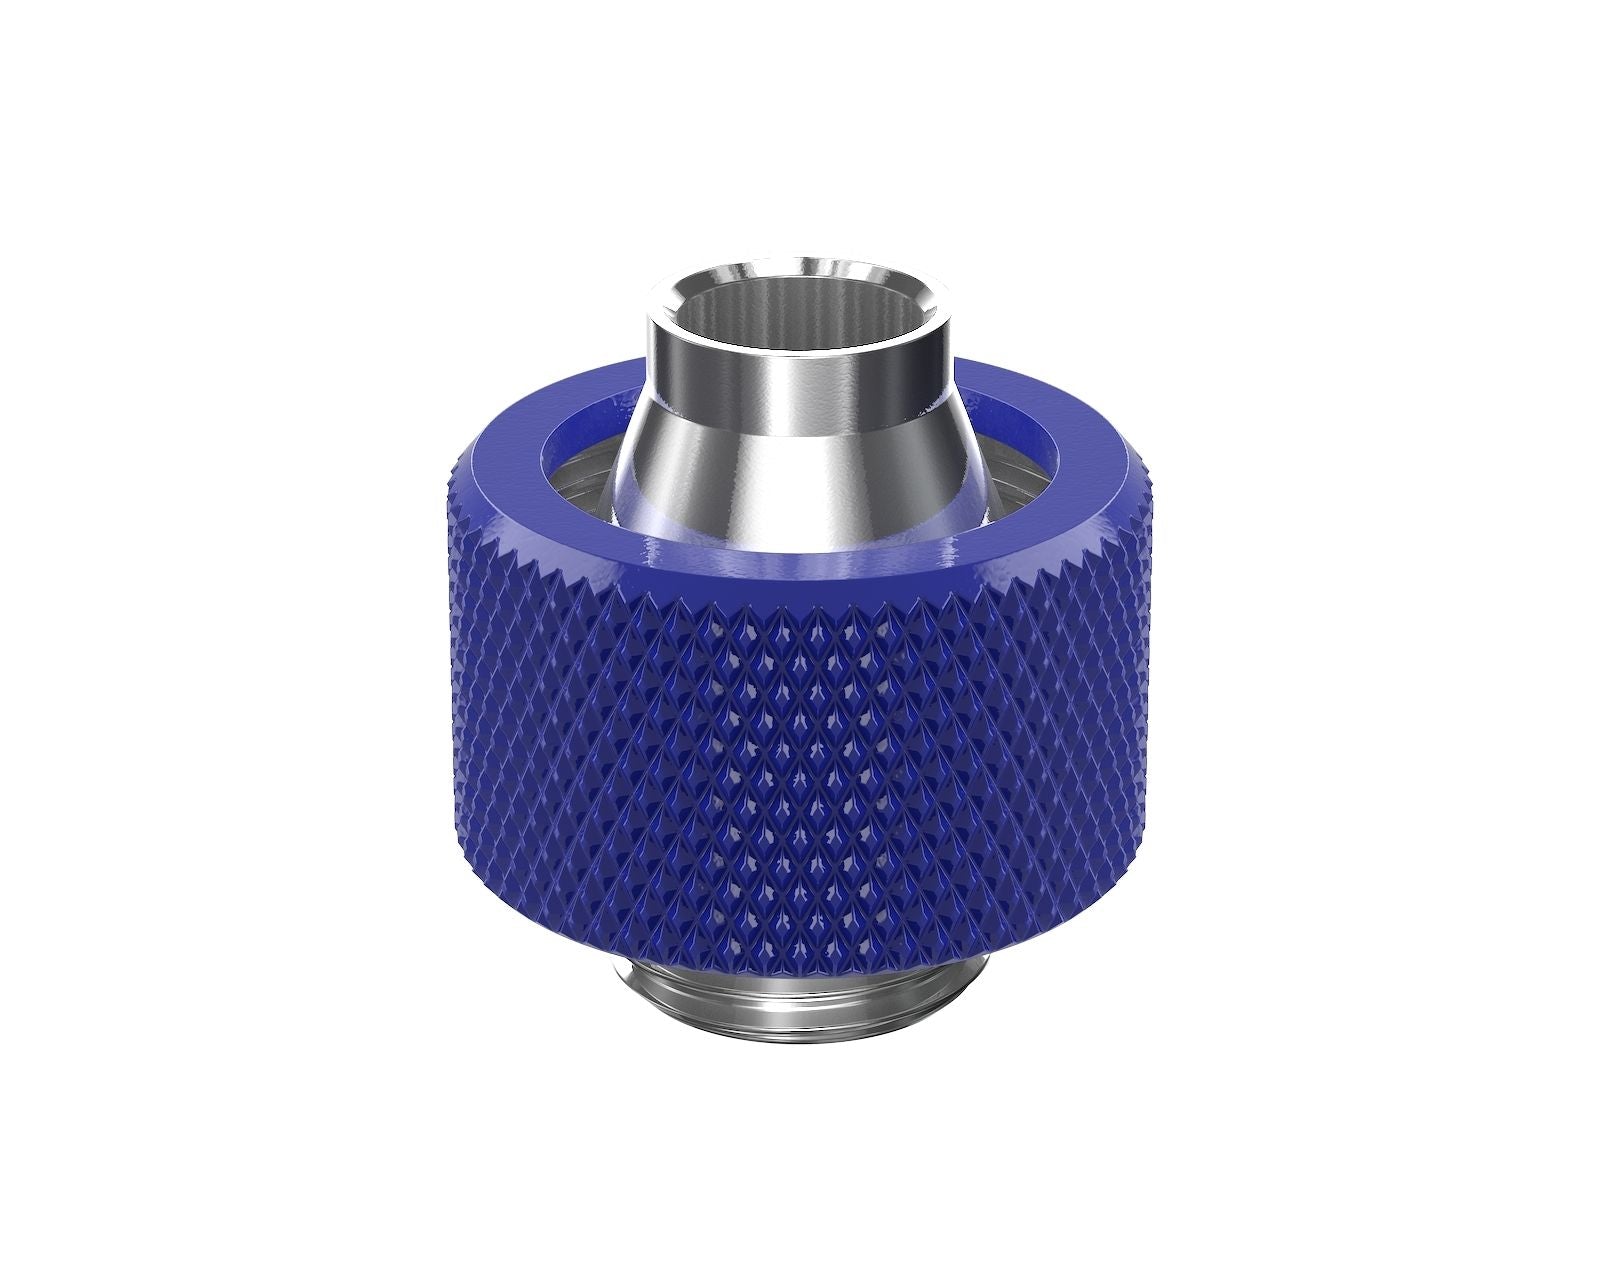 PrimoChill SecureFit SX - Premium Compression Fitting For 3/8in ID x 5/8in OD Flexible Tubing (F-SFSX58) - Available in 20+ Colors, Custom Watercooling Loop Ready - True Blue